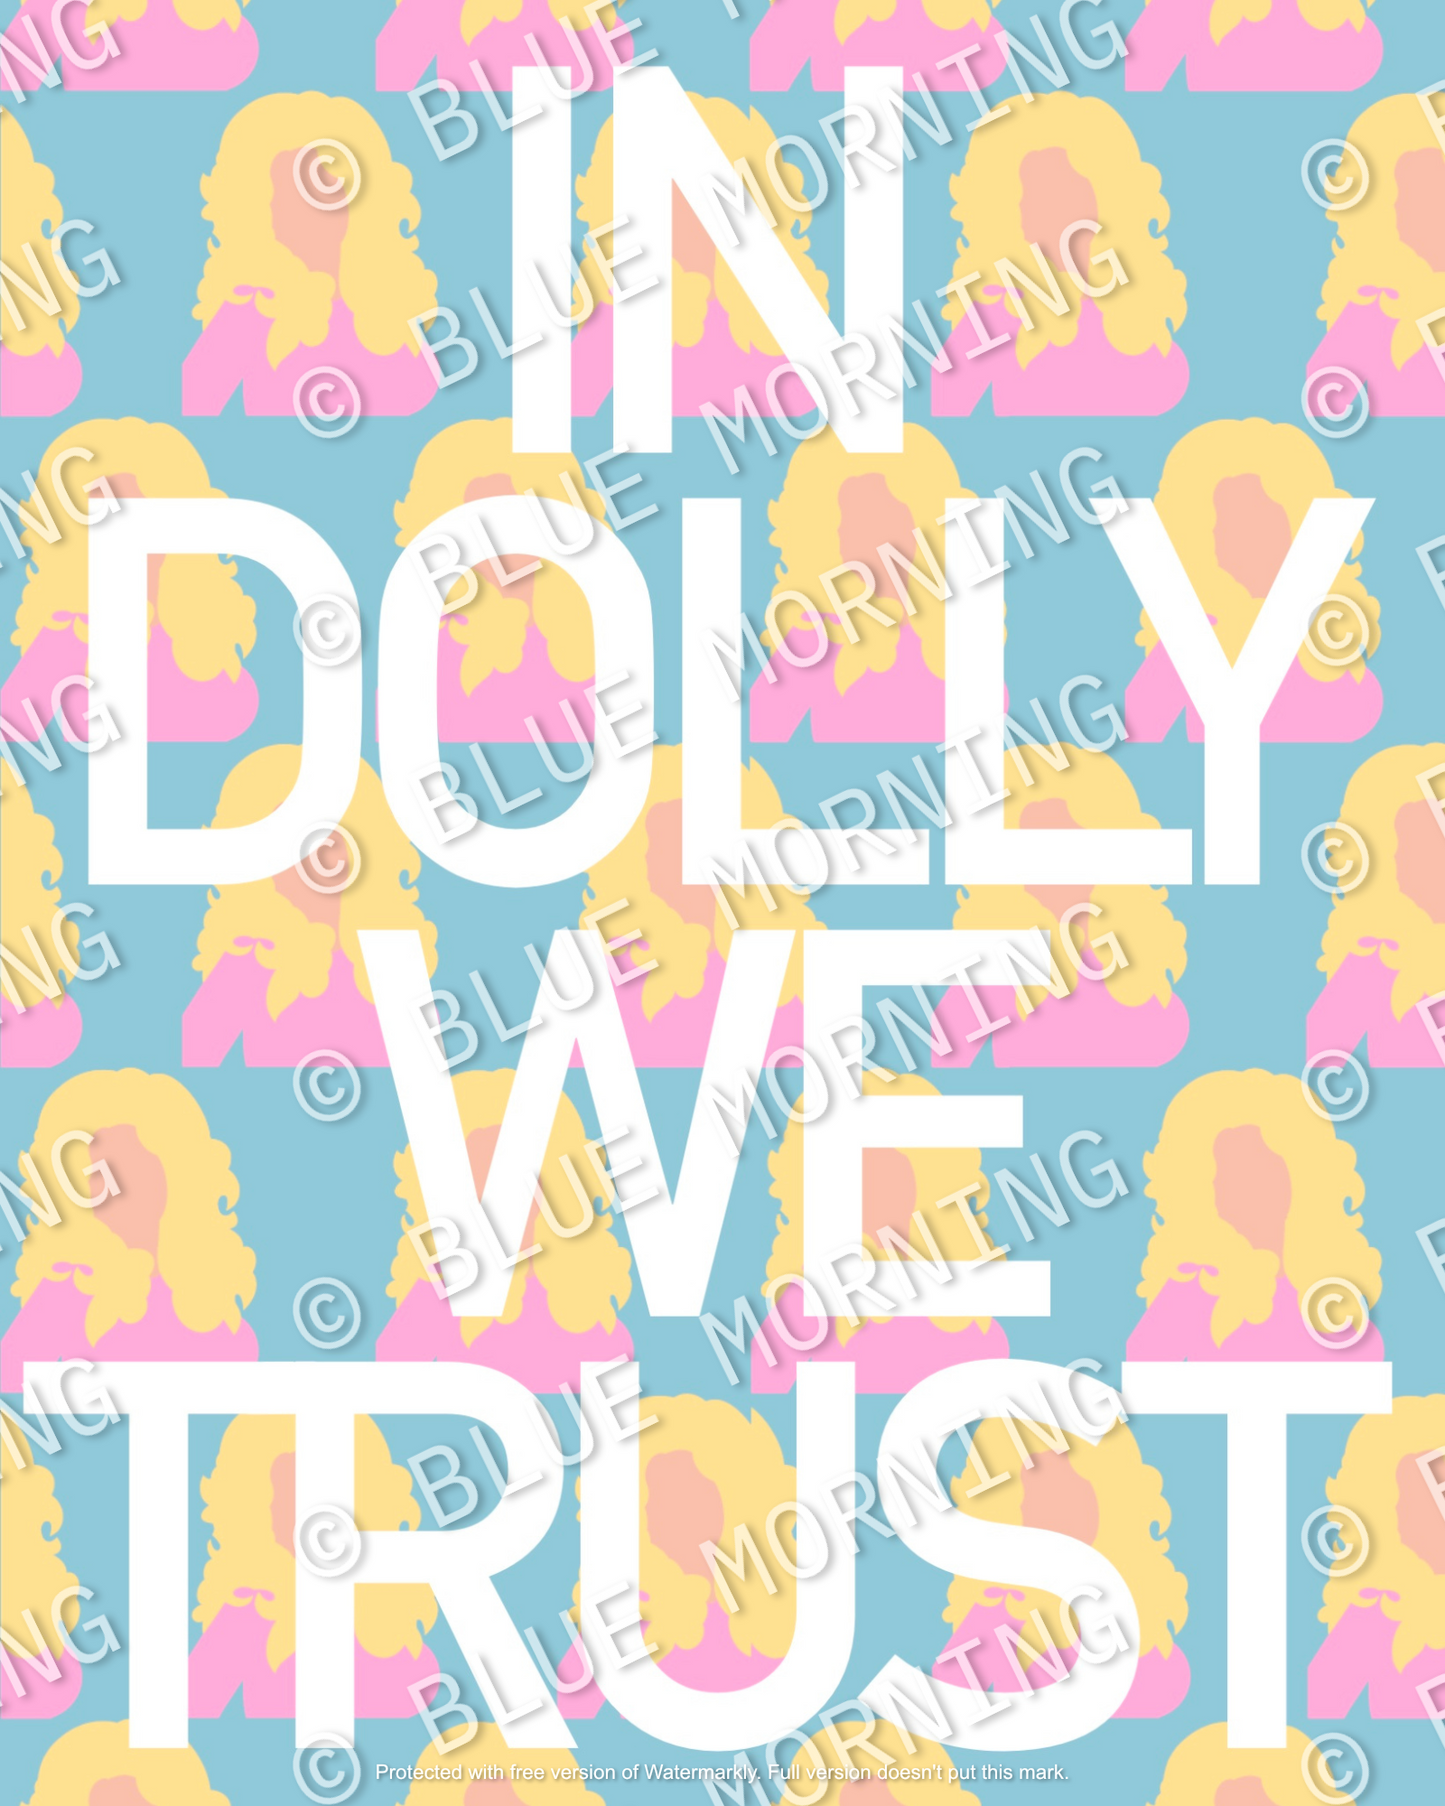 In Dolly We Trust 8 x 10 Print